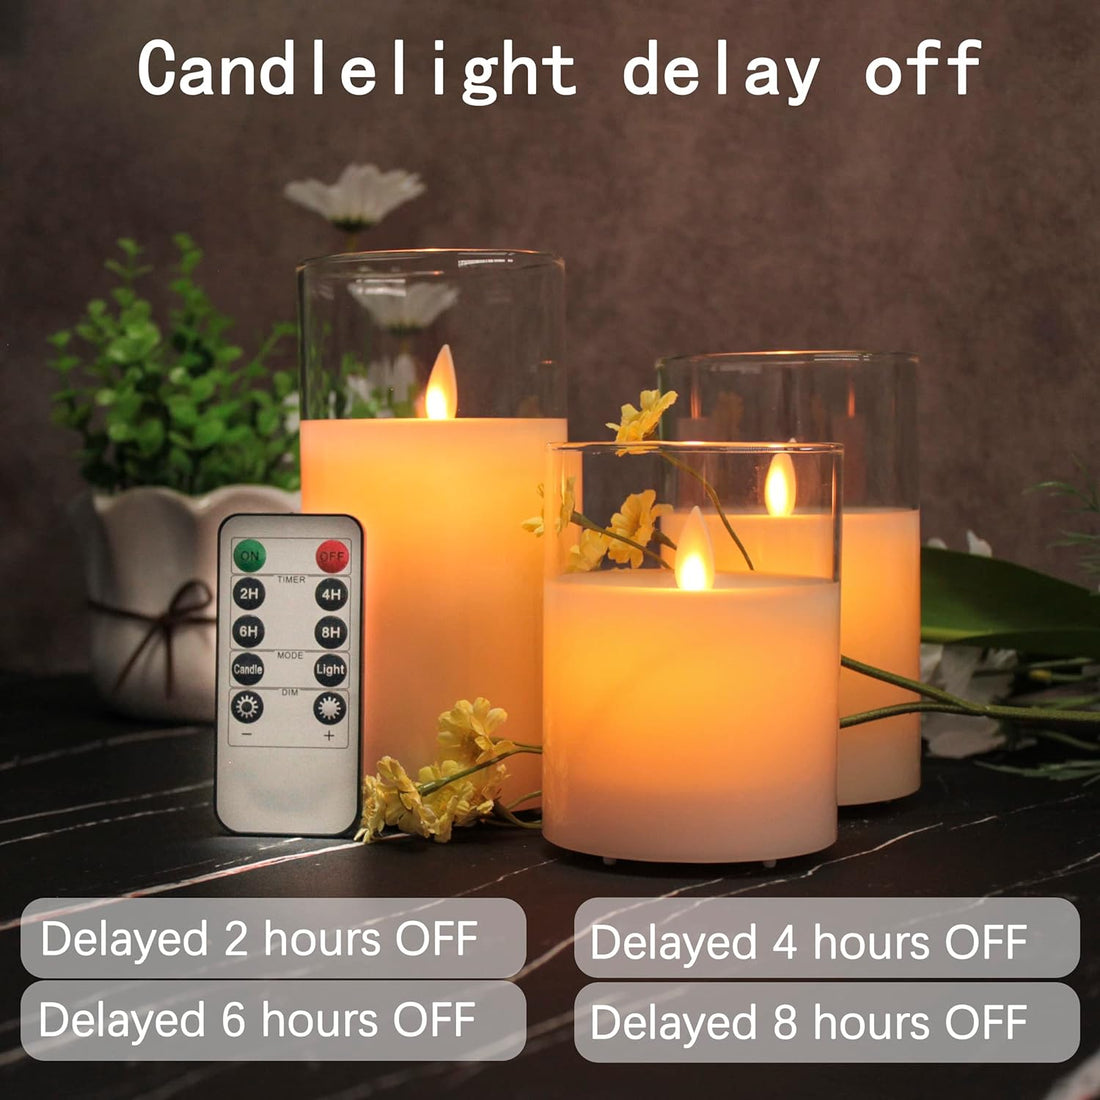 LEDHOLYT Flameless Candle Set, Flickering LED Pillar Candle with Remote Control and Timer, Upgraded Swing Wick, Built-in Battery Rechargeable Clear Glass Electronic Candles, Set of 3